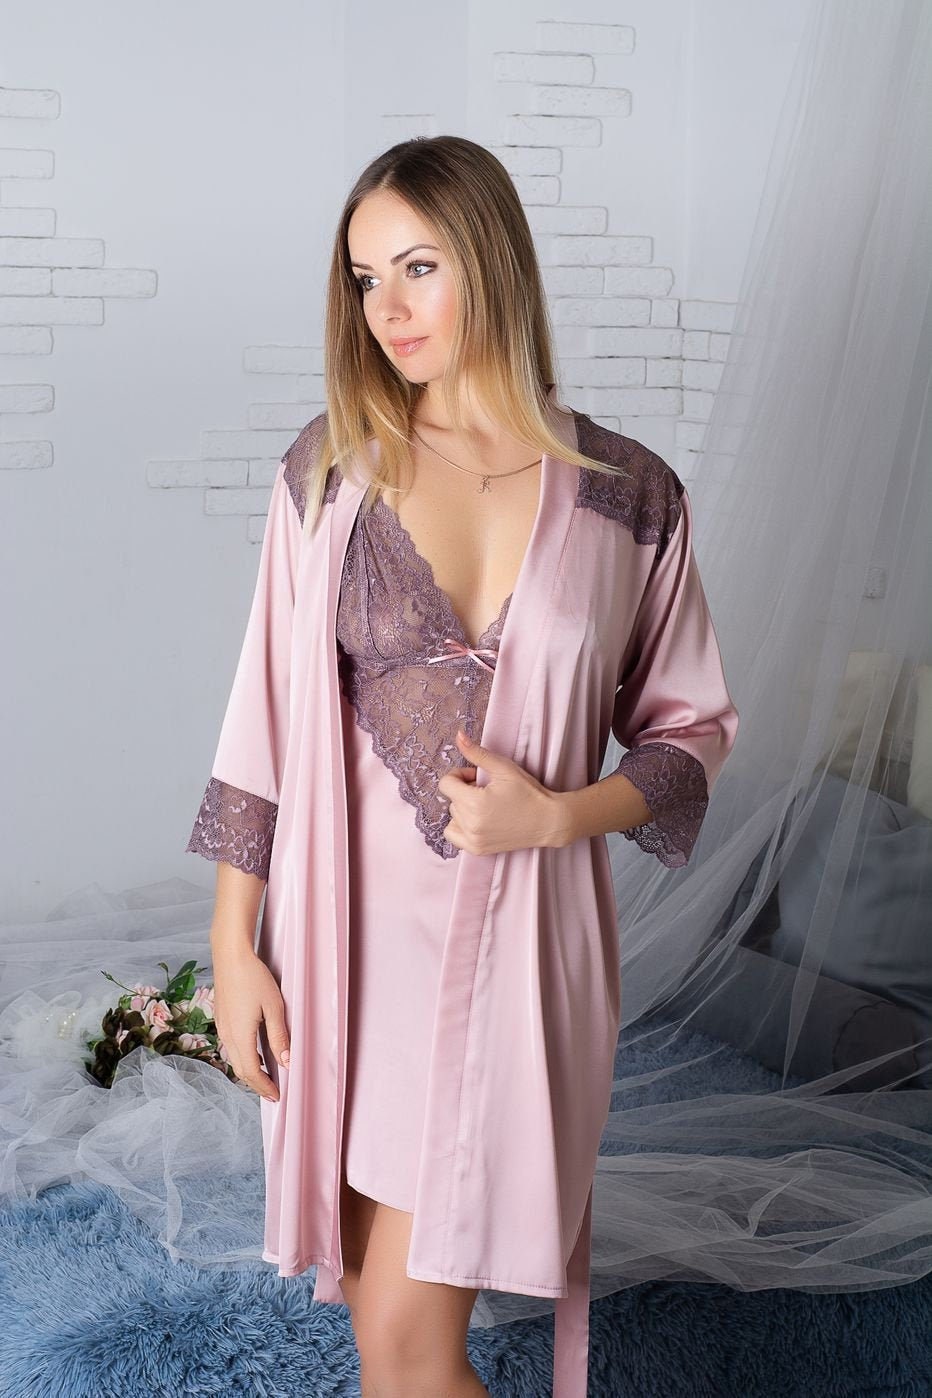 Robe and nightgown set, pajama set, bridal nightgown, lingerie sleepwear, dressing gown, lace robe, satin robe, wedding lingerie